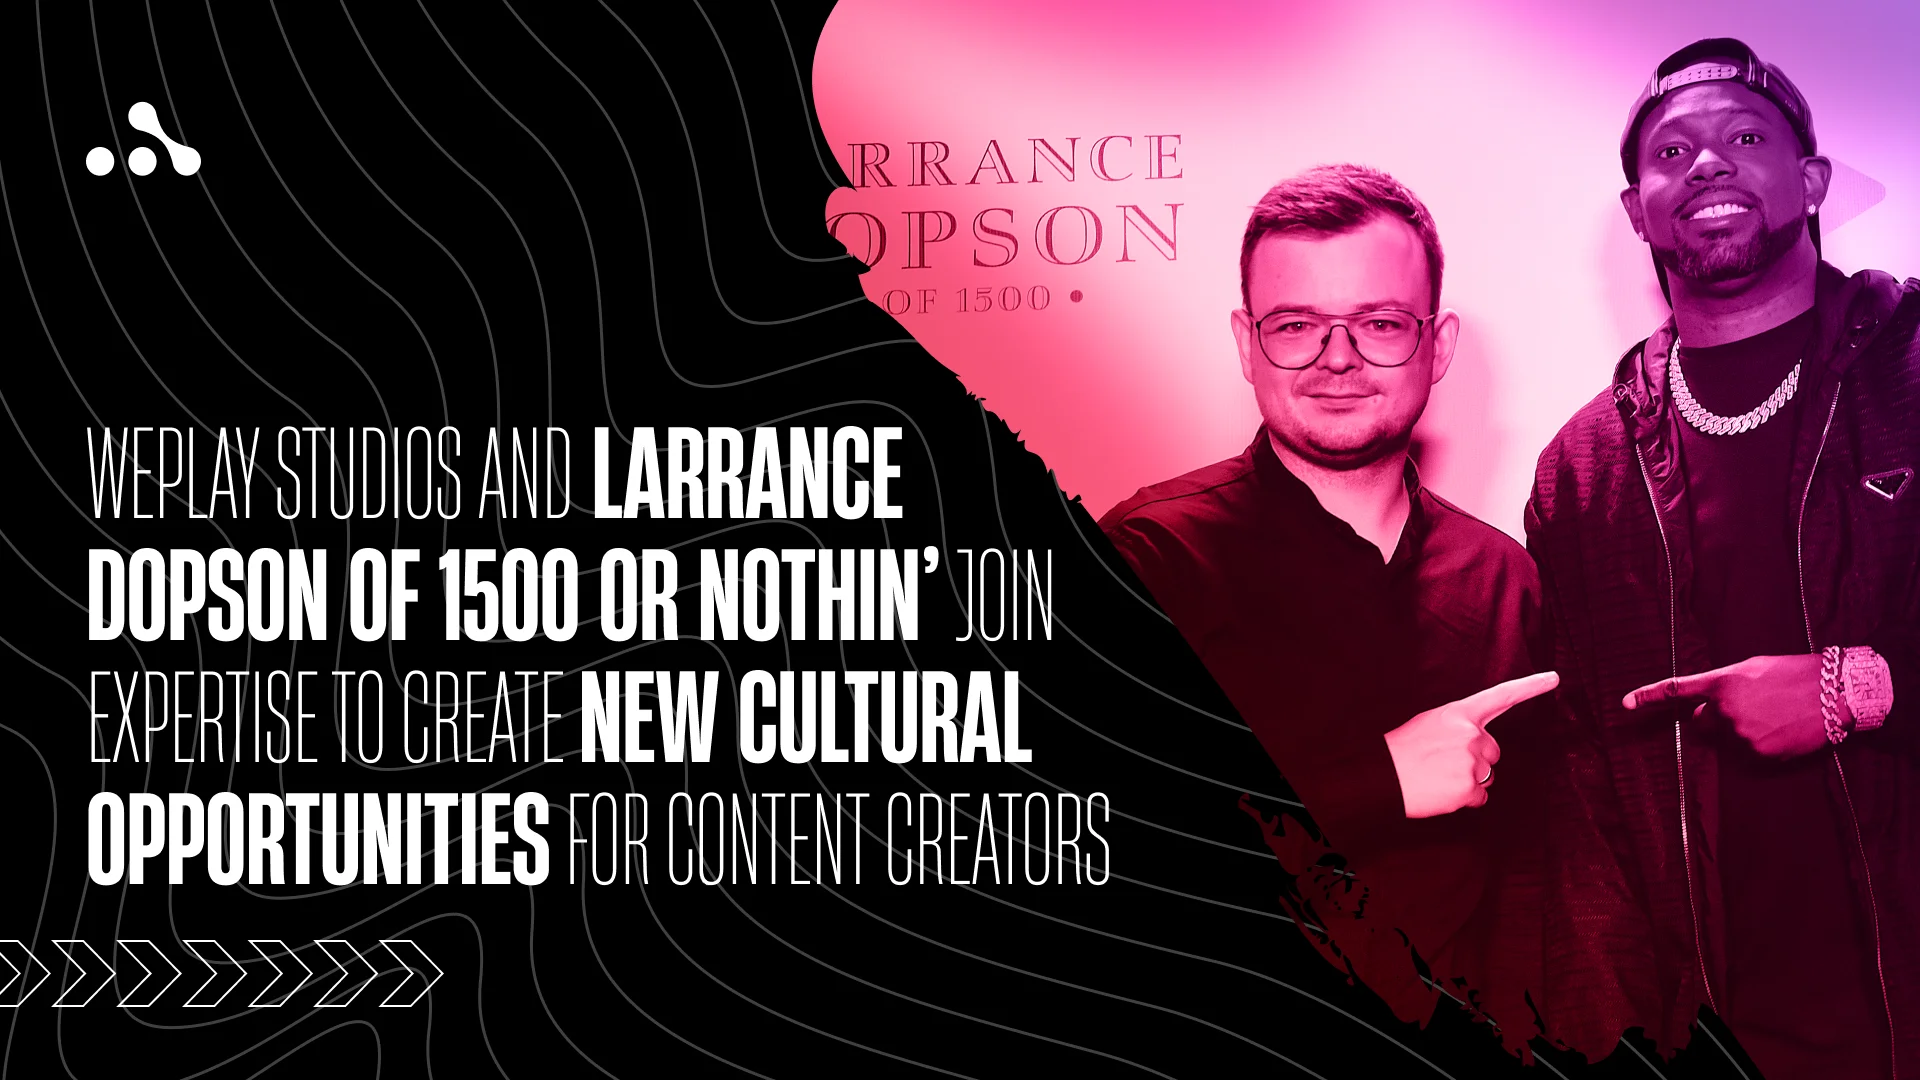 WePlay Studios and Larrance Dopson of 1500 or Nothin’ join expertise to create new cultural opportunities for content creators. Visual: WePlay Holding